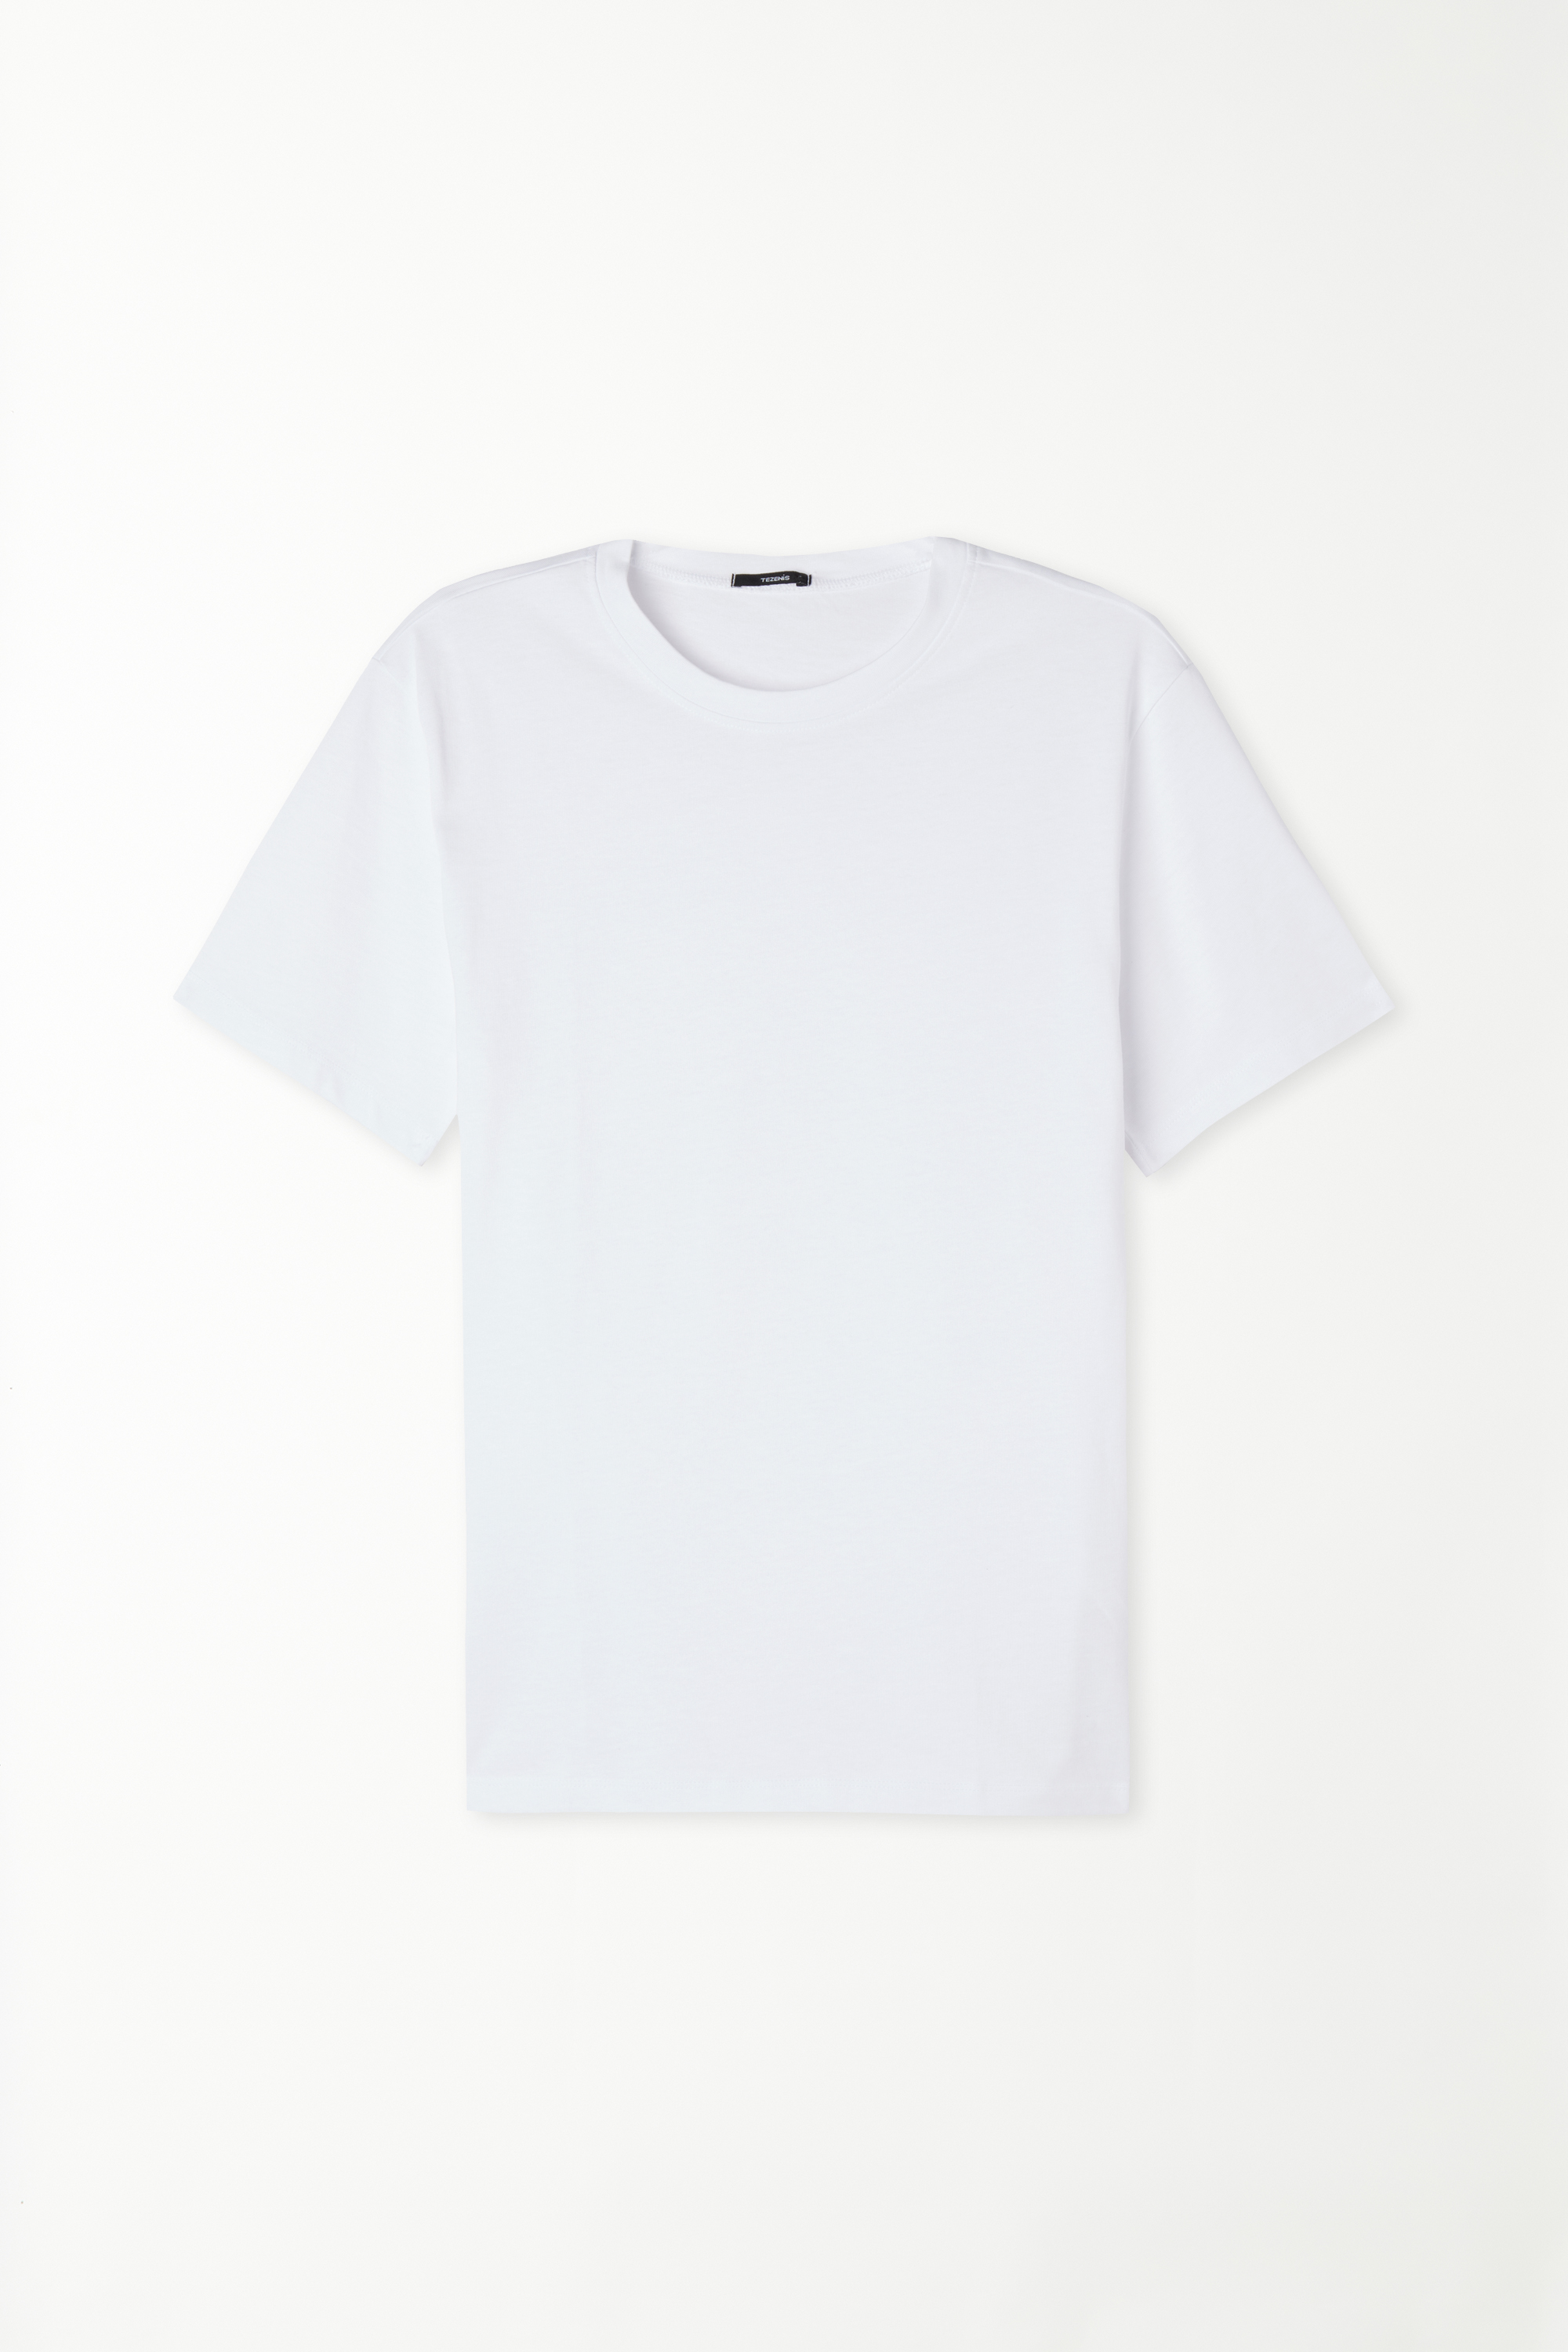 100% Cotton T-Shirt with Rounded Neck